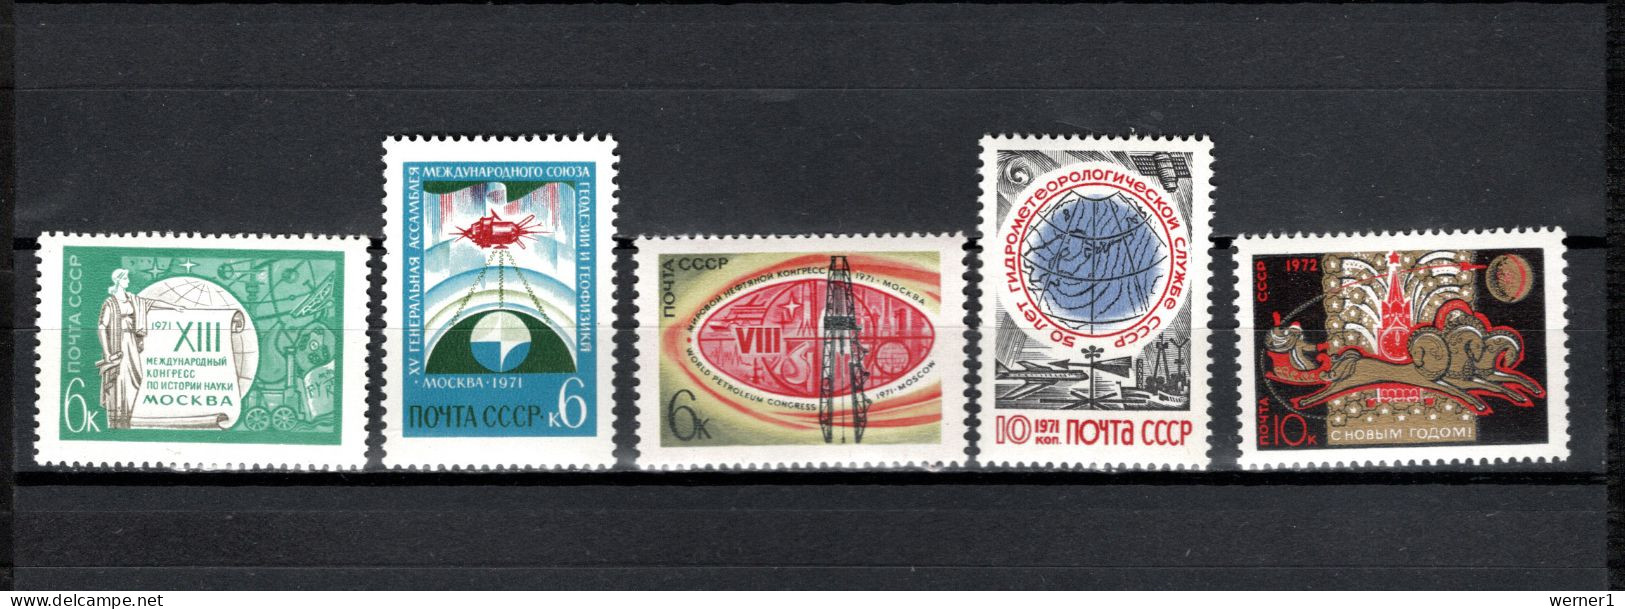 USSR Russia 1971 Space, International Congress Moscow, Meteorology, New Year 5 Stamps MNH - Rusland En USSR